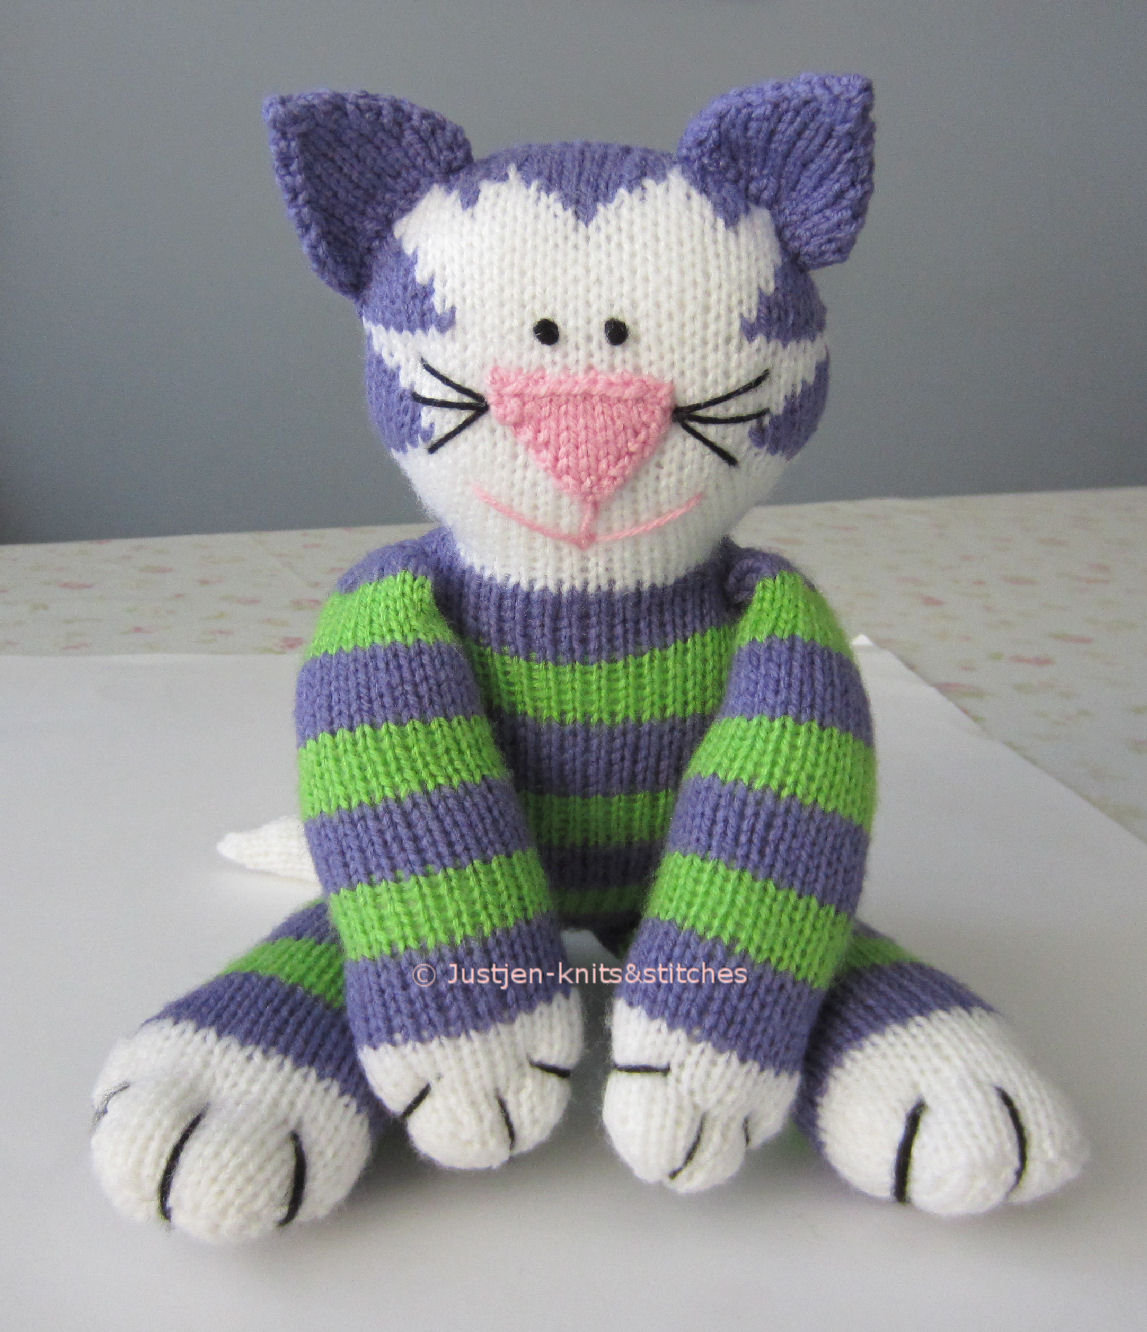 Justjenknits&stitches Share Kitty Knitted Cat Pattern